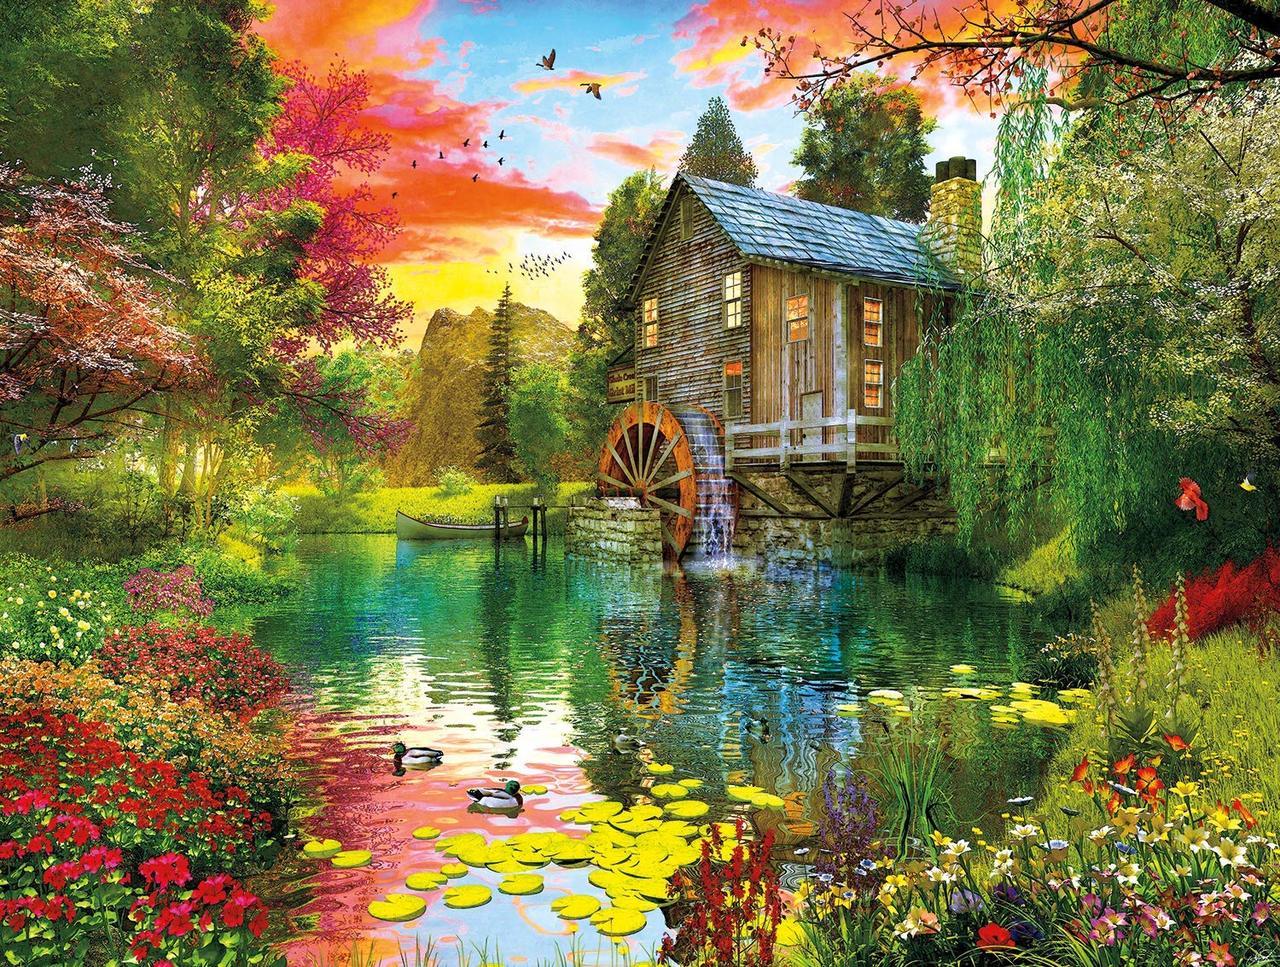 Sunset at the Mill - 750pc Jigsaw Puzzle by Buffalo Games - image main